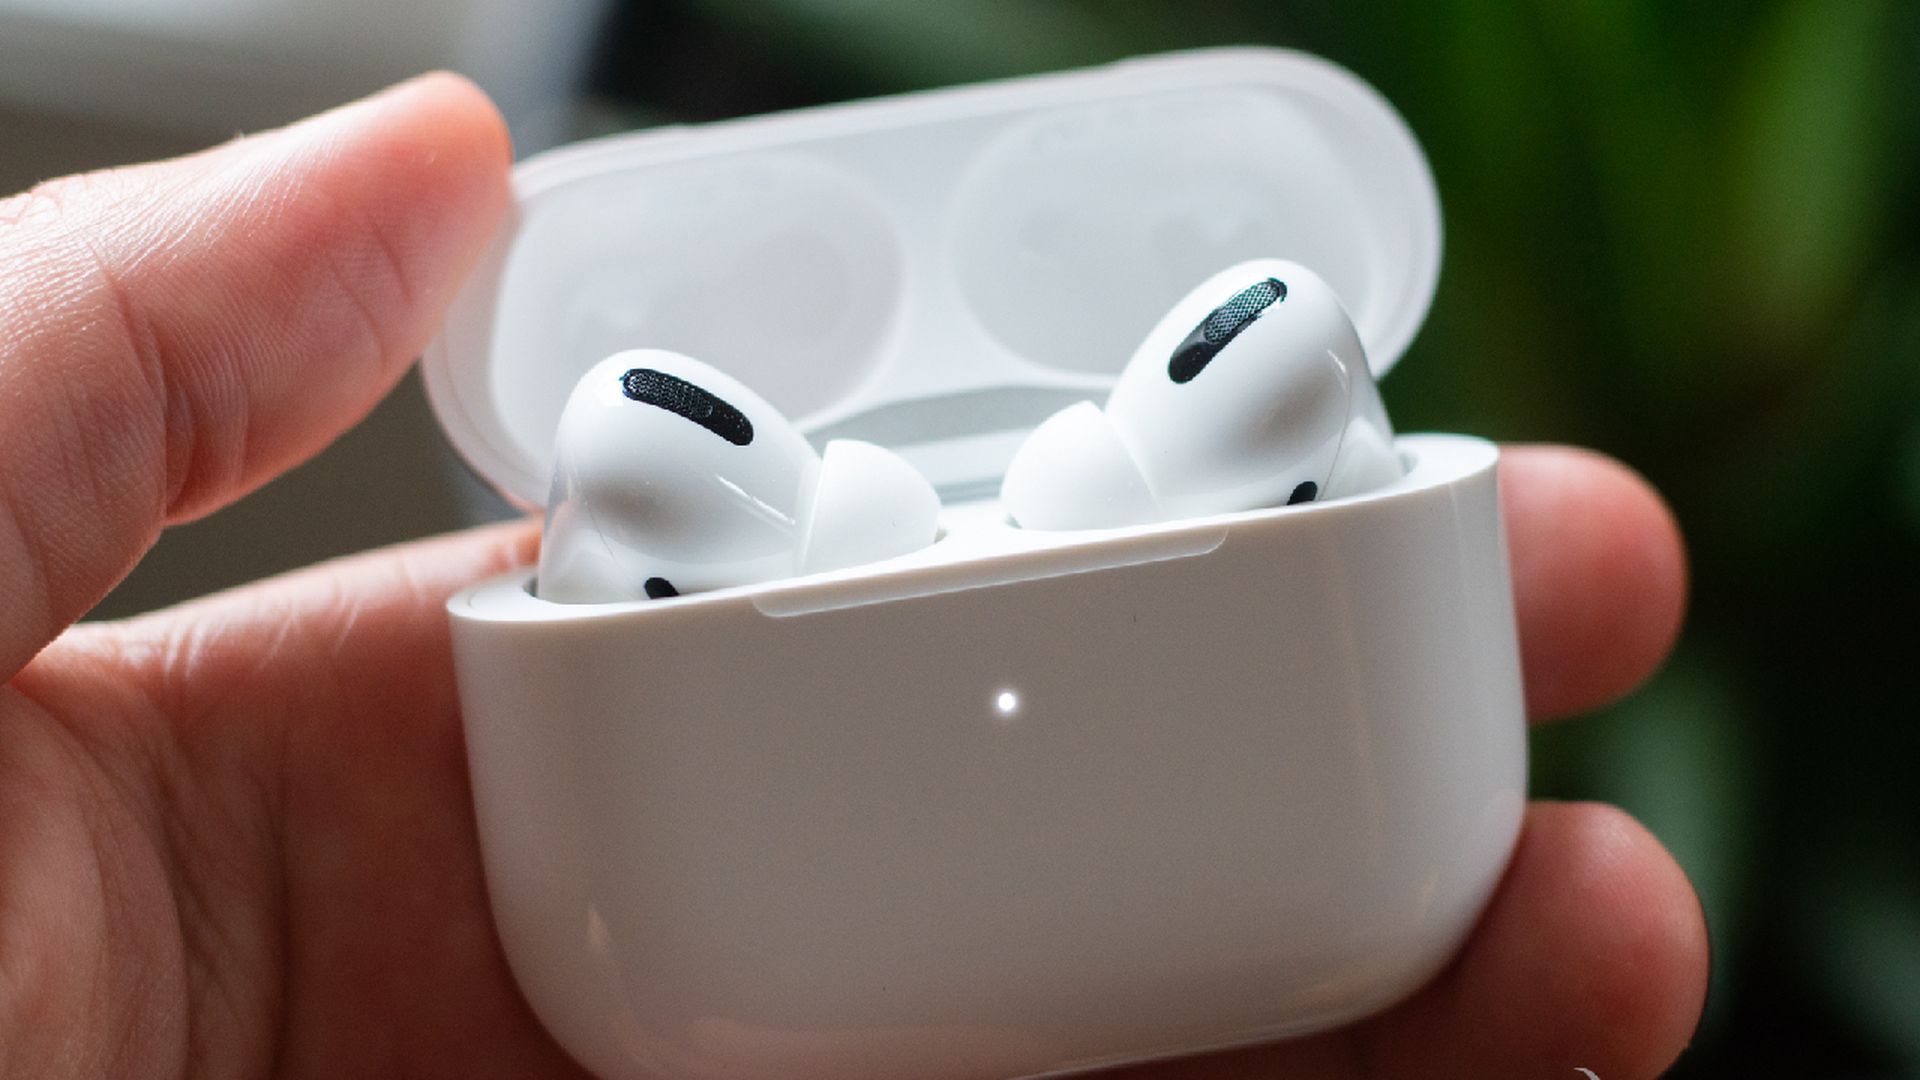 In this article, we are going to be covering how to fix iOS 16 AirPods not working, so you can continue using your headphones without any issues.